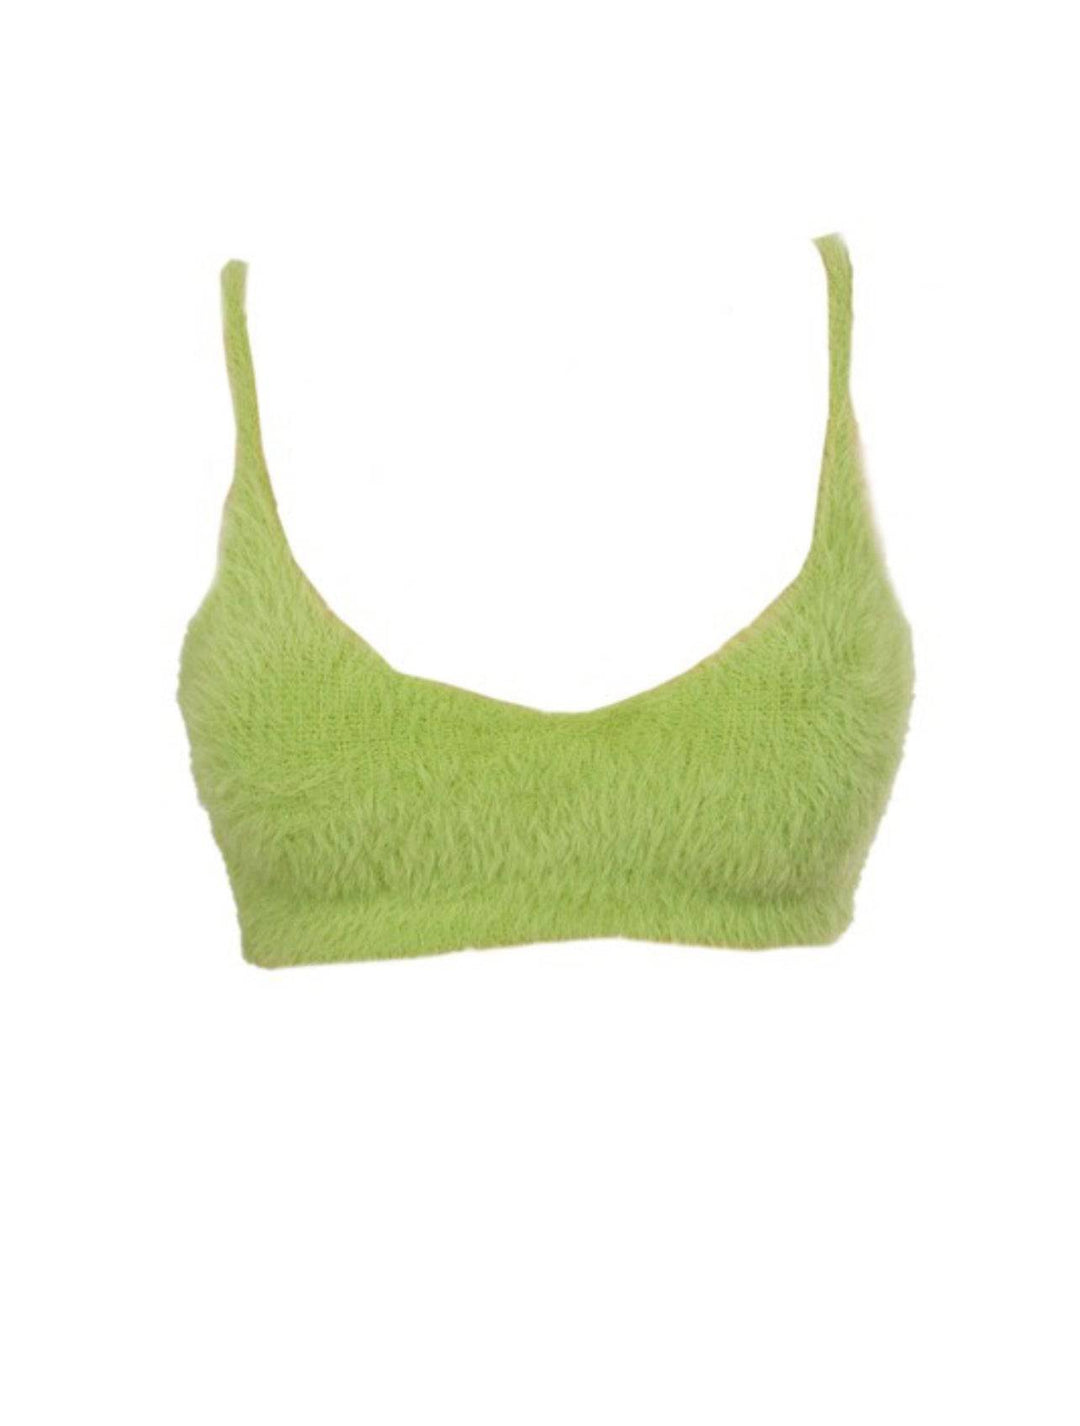 Polly Fuzzy Green Criss Cross Top - Style Baby OMG Fashion Boutique - Stylebabyomg - Buy - Aesthetic Baddie Outfits - Babyboo - OOTD - Shie 